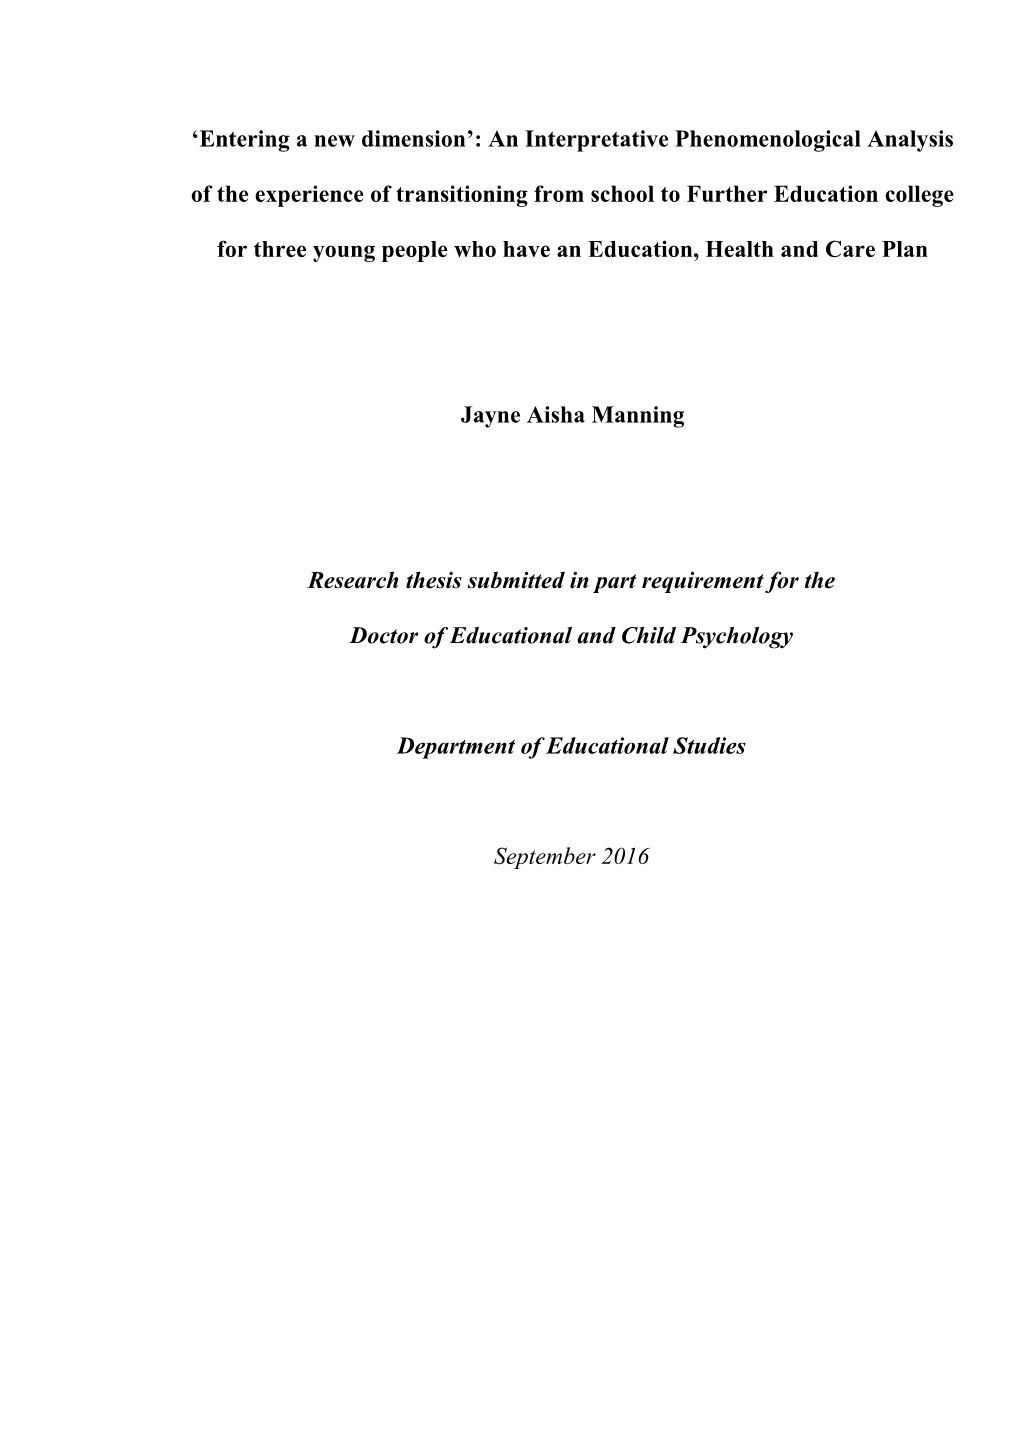 Research Thesis Submitted in Part Requirement for The